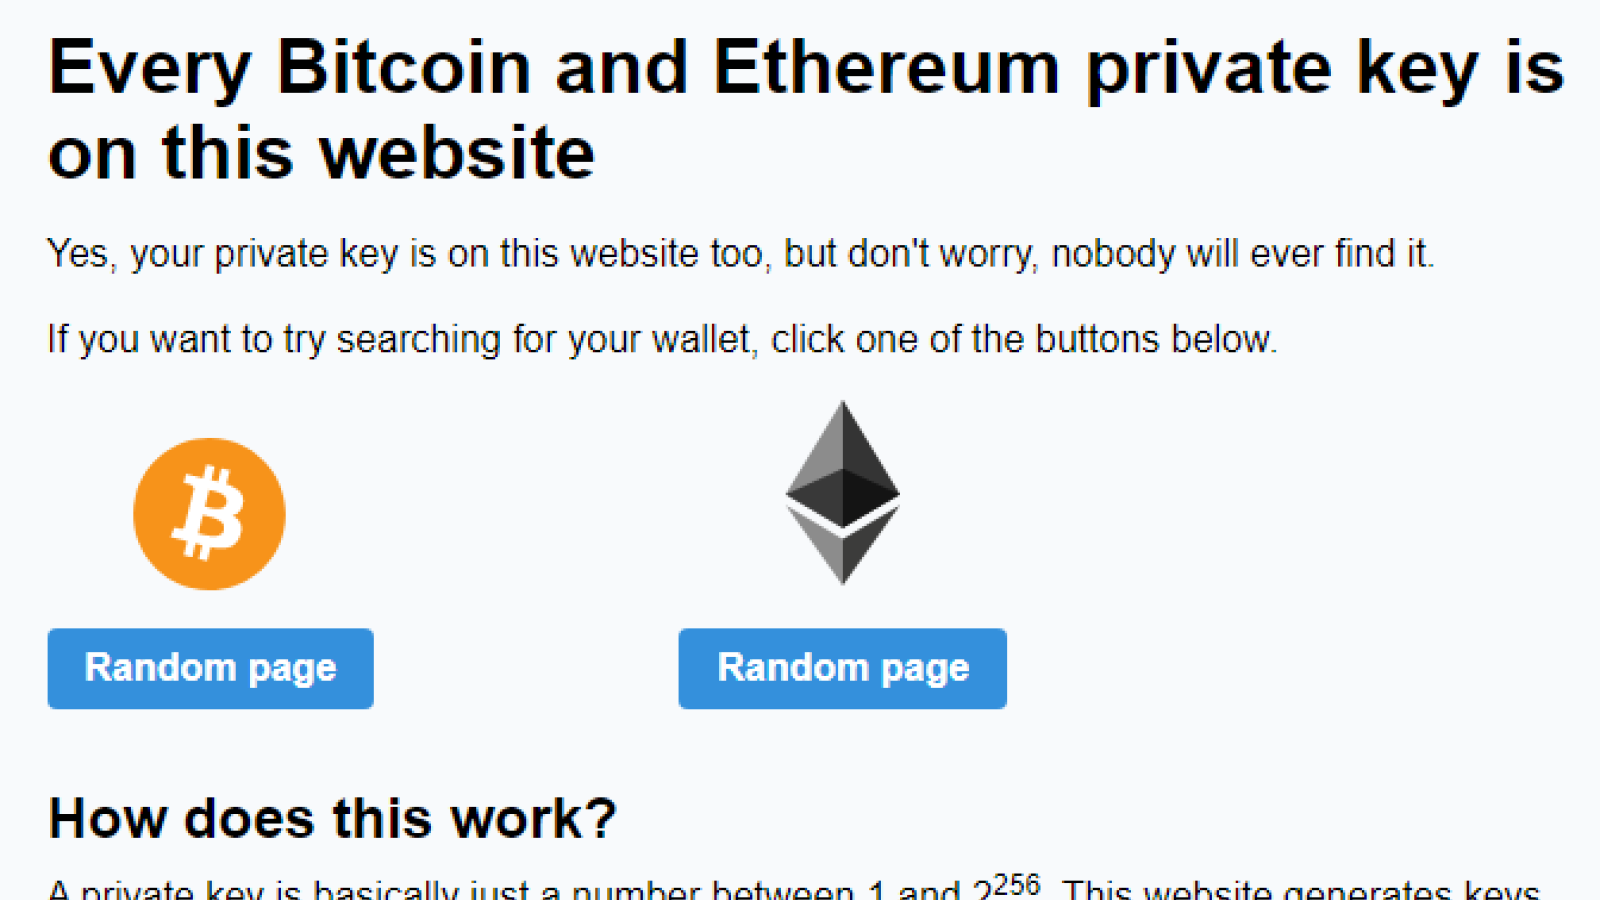 Every Bitcoin and Ethereum private key is on this website